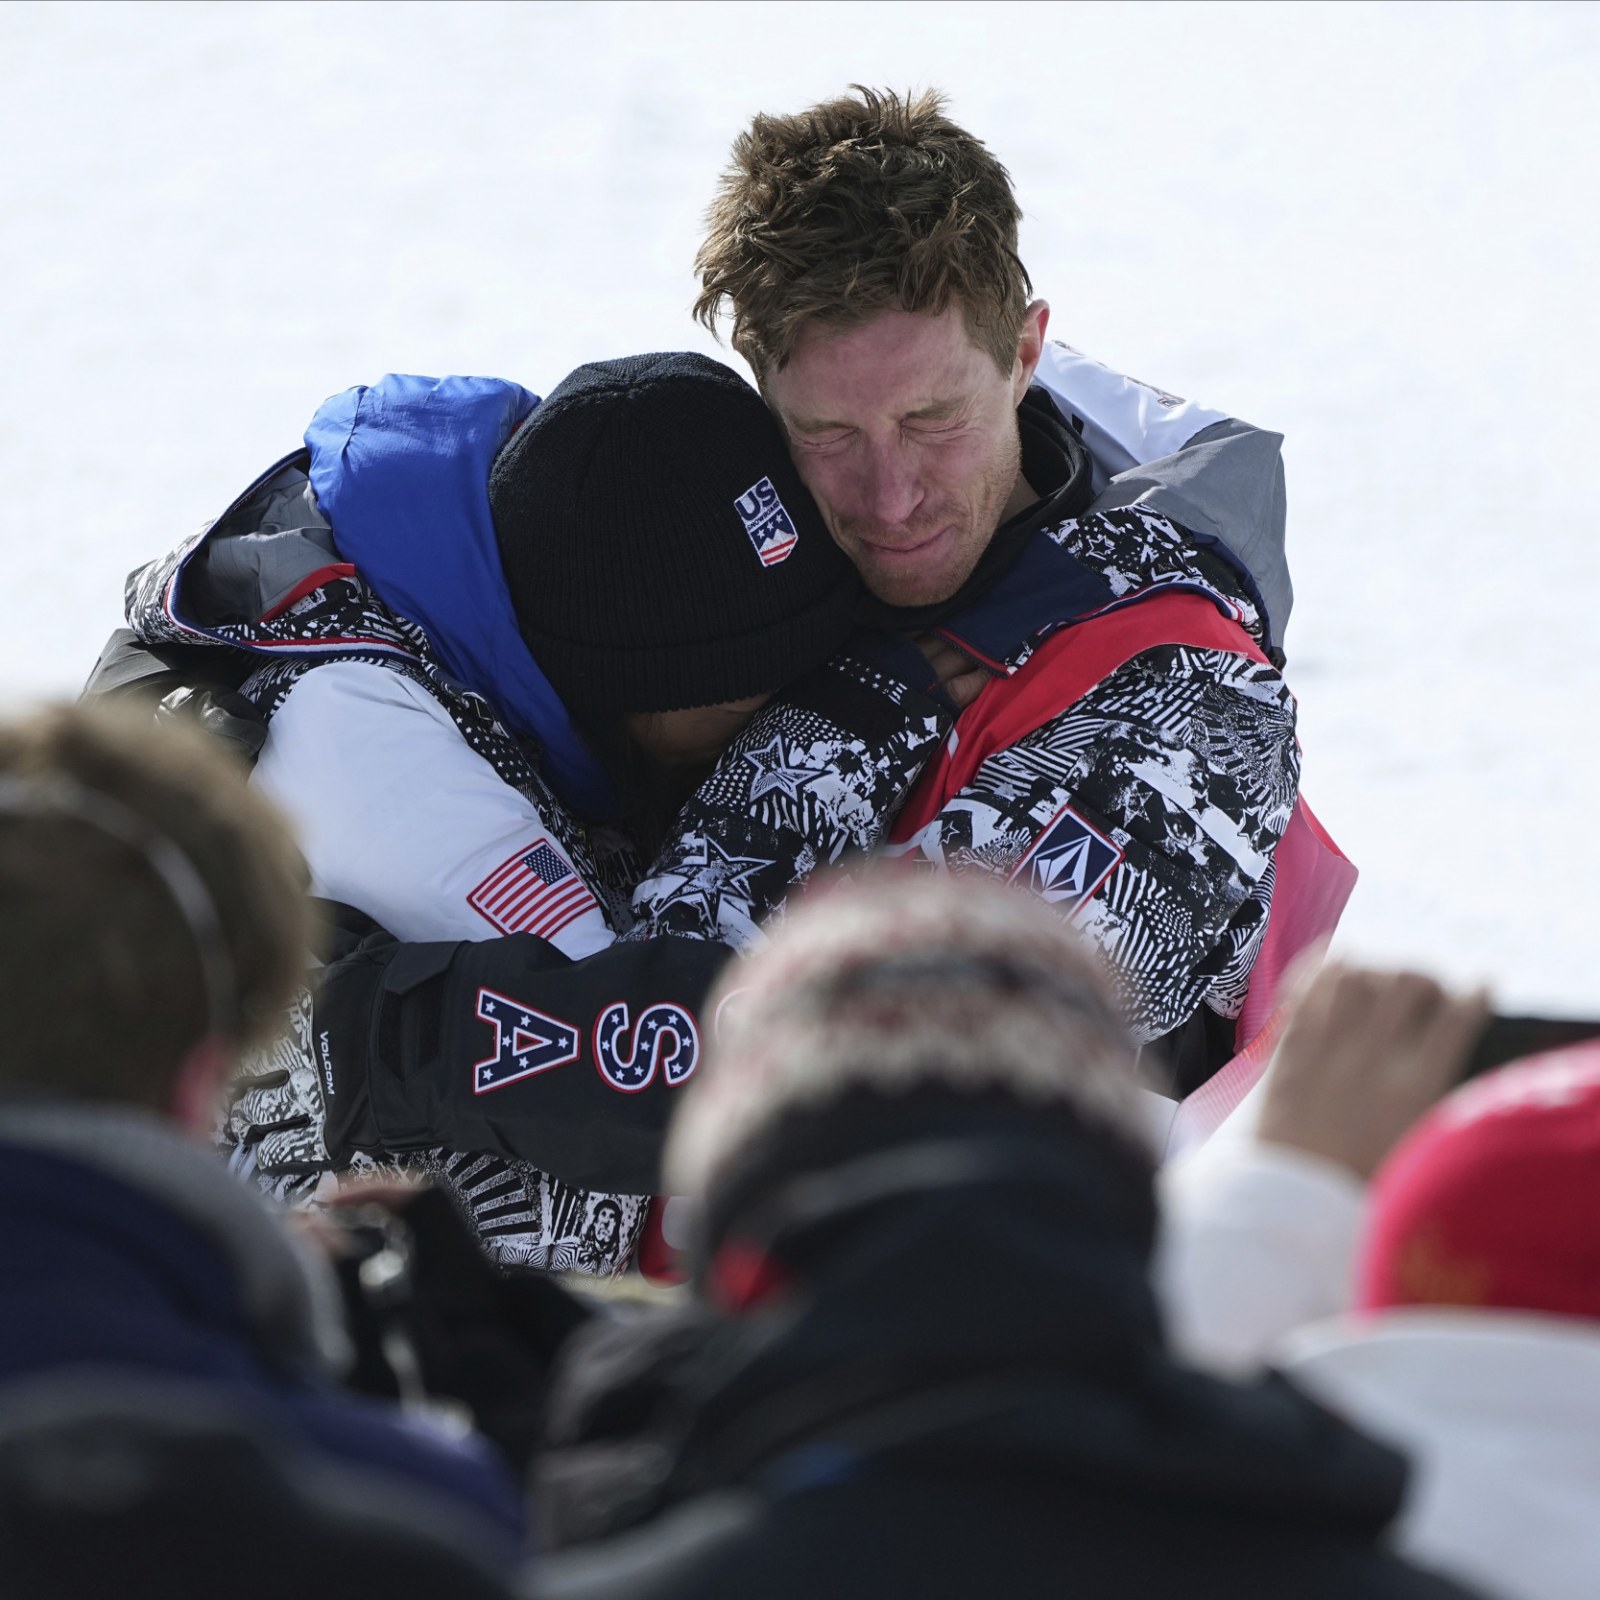 Olympic snowboarder Shaun White on being vulnerable with mental health